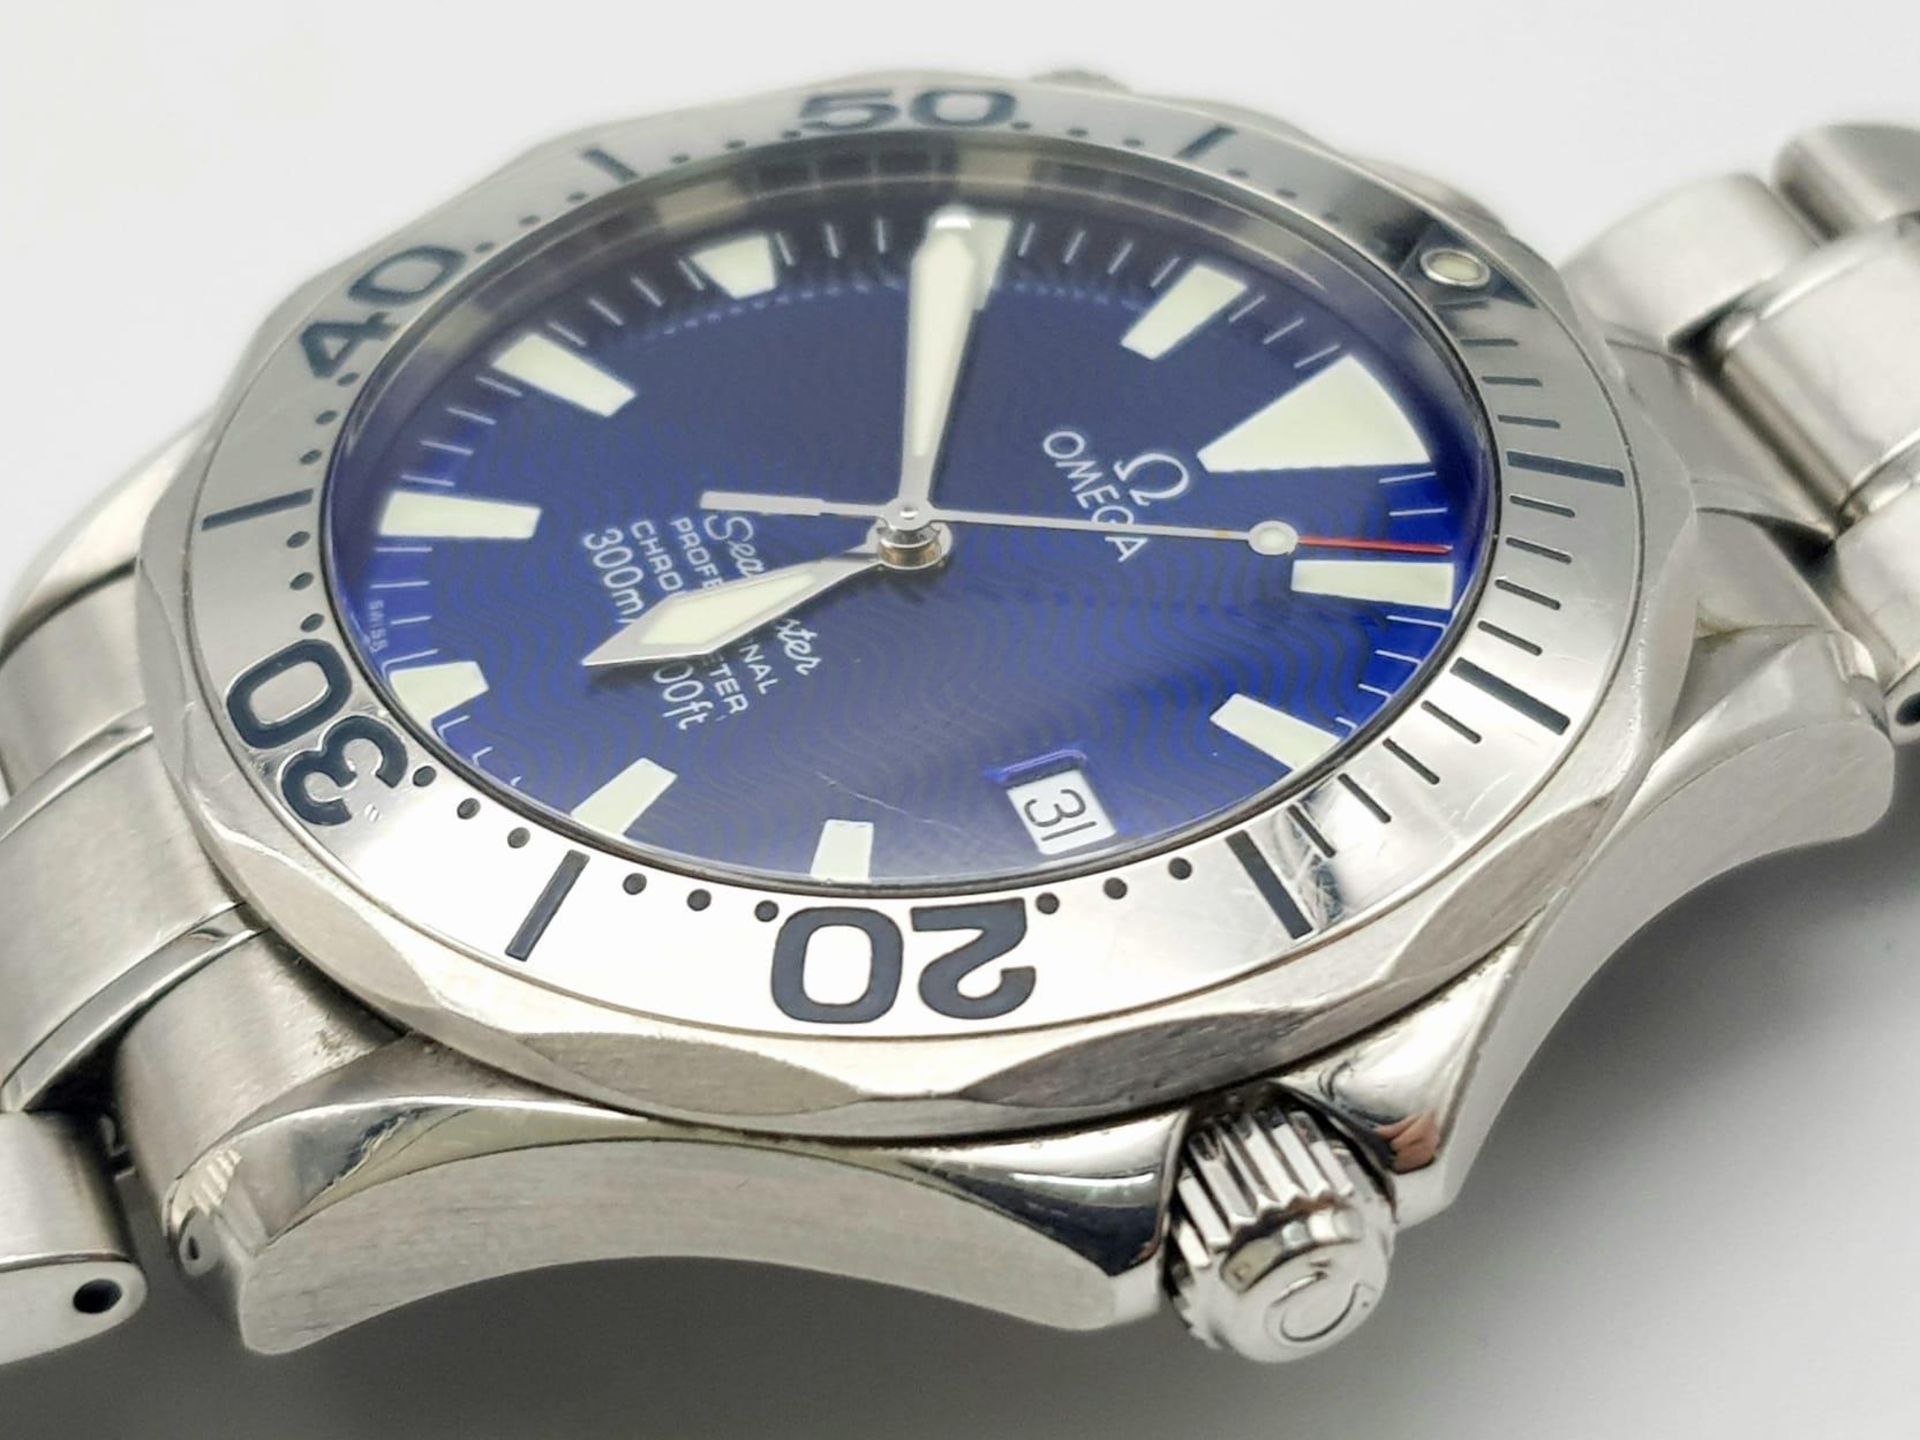 A Stylish Omega Seamaster Professional 300M Gents Watch. Stainless steel bracelet and case - 41mm. - Image 3 of 7